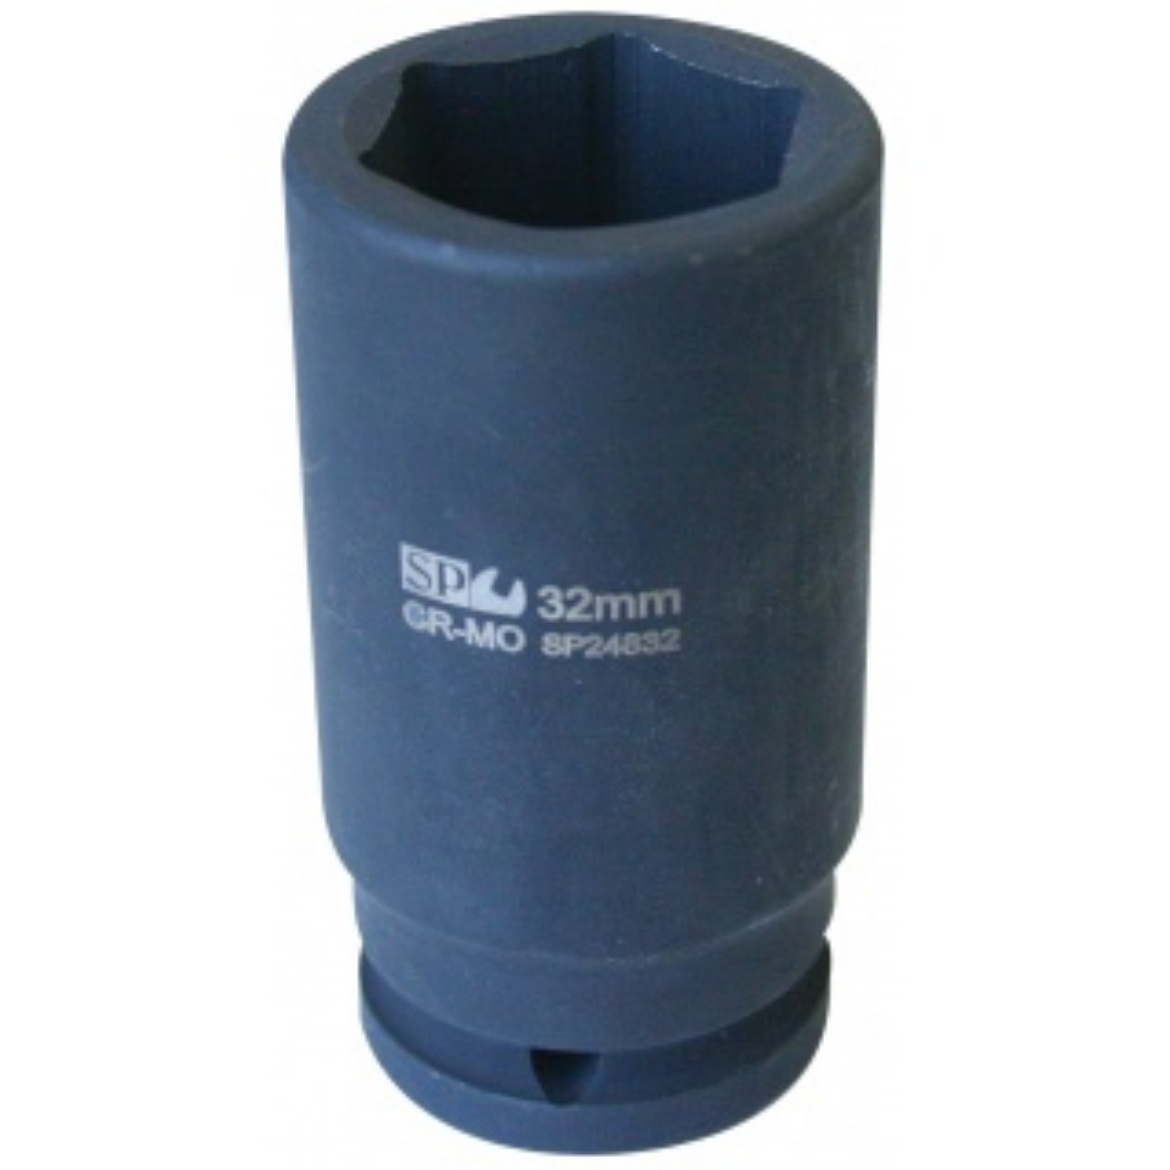 Picture of SOCKET IMPACT 3/4" DR 6PT DEEP METRIC 67MM SP TOOLS